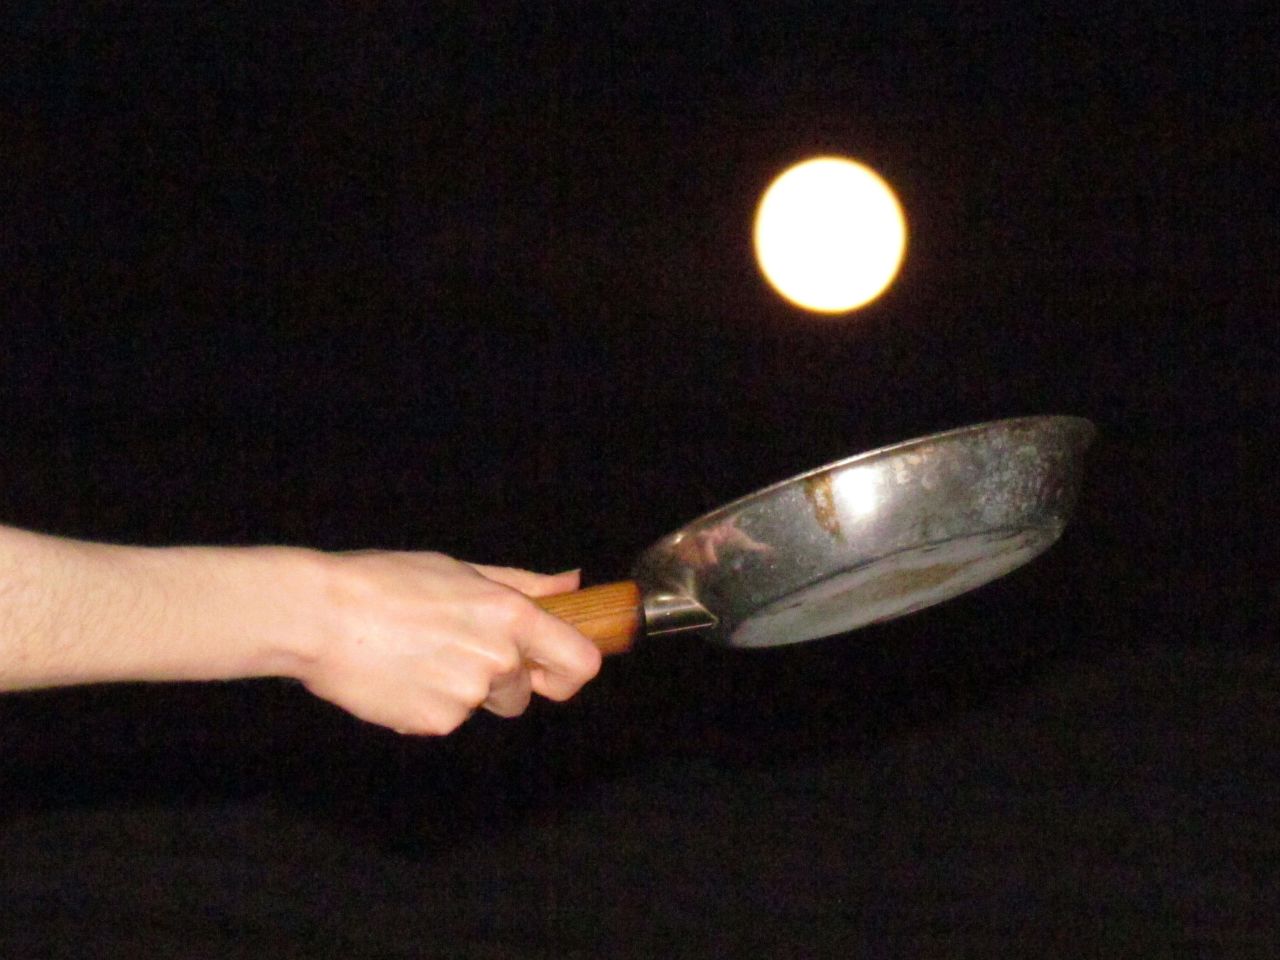 <a href="http://ireport.cnn.com/docs/DOC-994228">Joyce Kelley Clinton </a>and her husband, Andy, wanted to flip some supermoon pancakes for their creative photograph. "We did not know how difficult it would be to arrange the photo so that the moon was an equivalent size with the pan," she said. "It required a lot of crouching, shifting, stepping, lifting, and maneuvering. And also giggling."